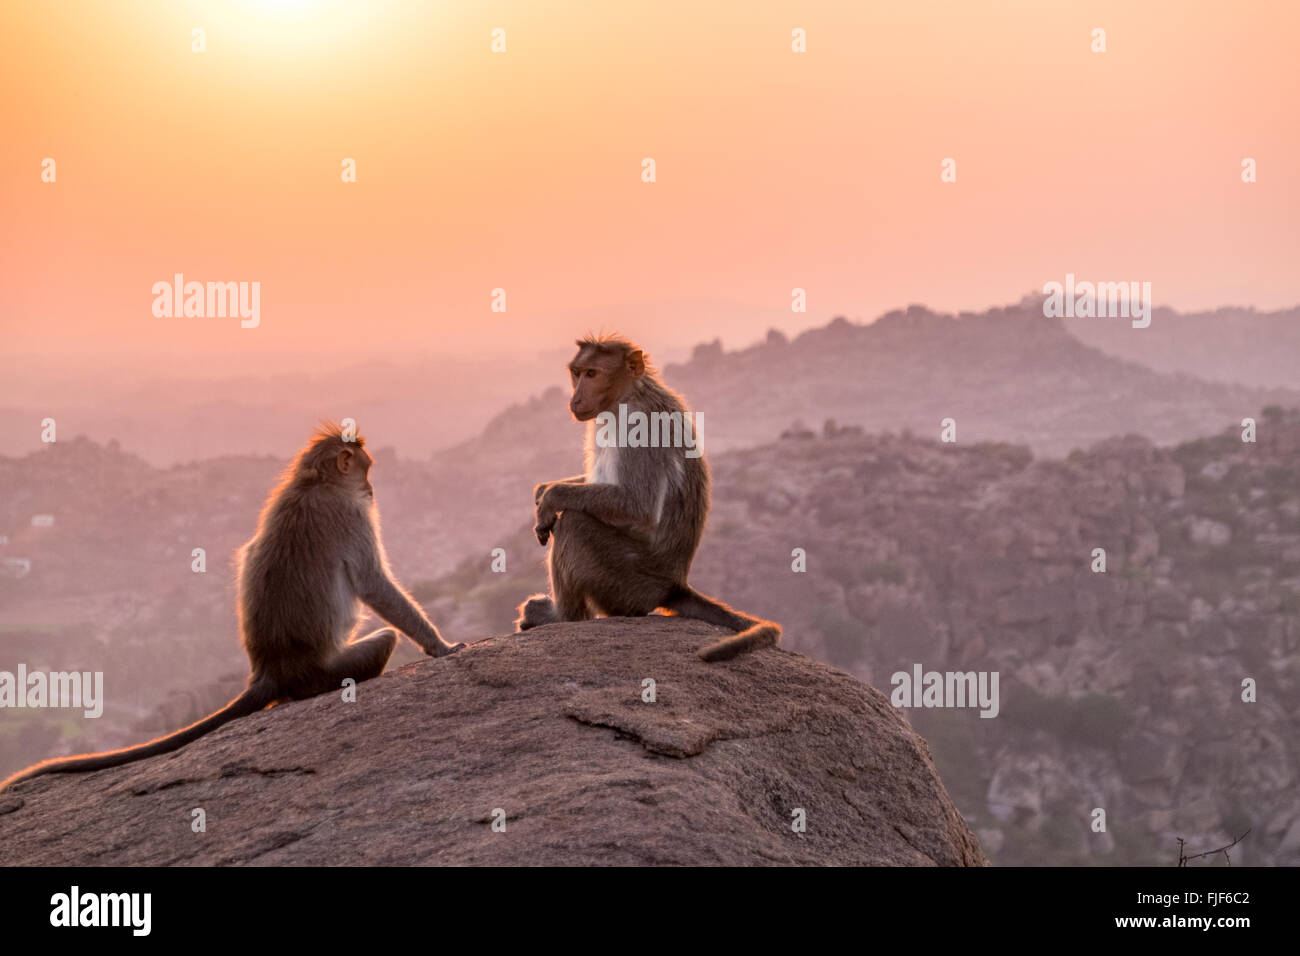 Temple monkeys inThe ruined city of Hampi in the Indian state of Karnataka Stock Photo